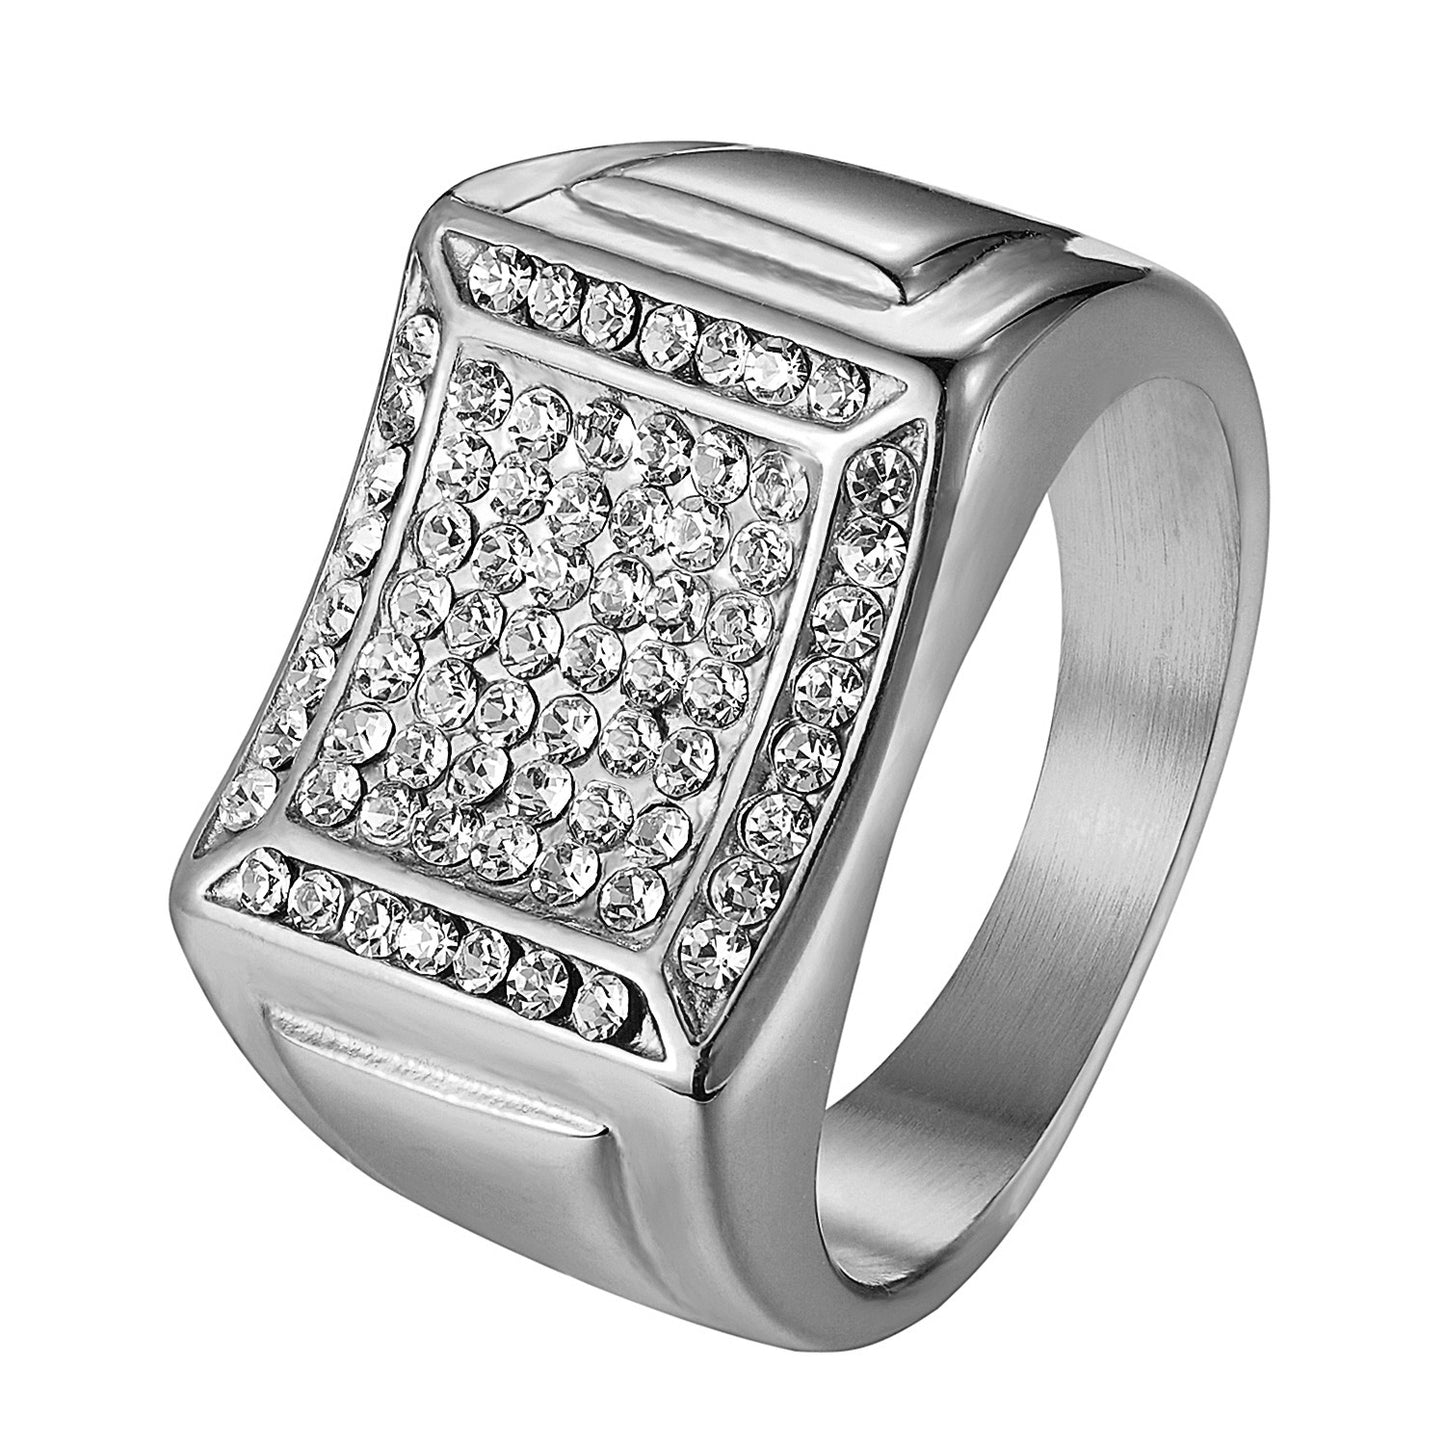 Stainless Steel Mens Wedding Engagement Ring Hip Hop Micro Pave Bling Pinky